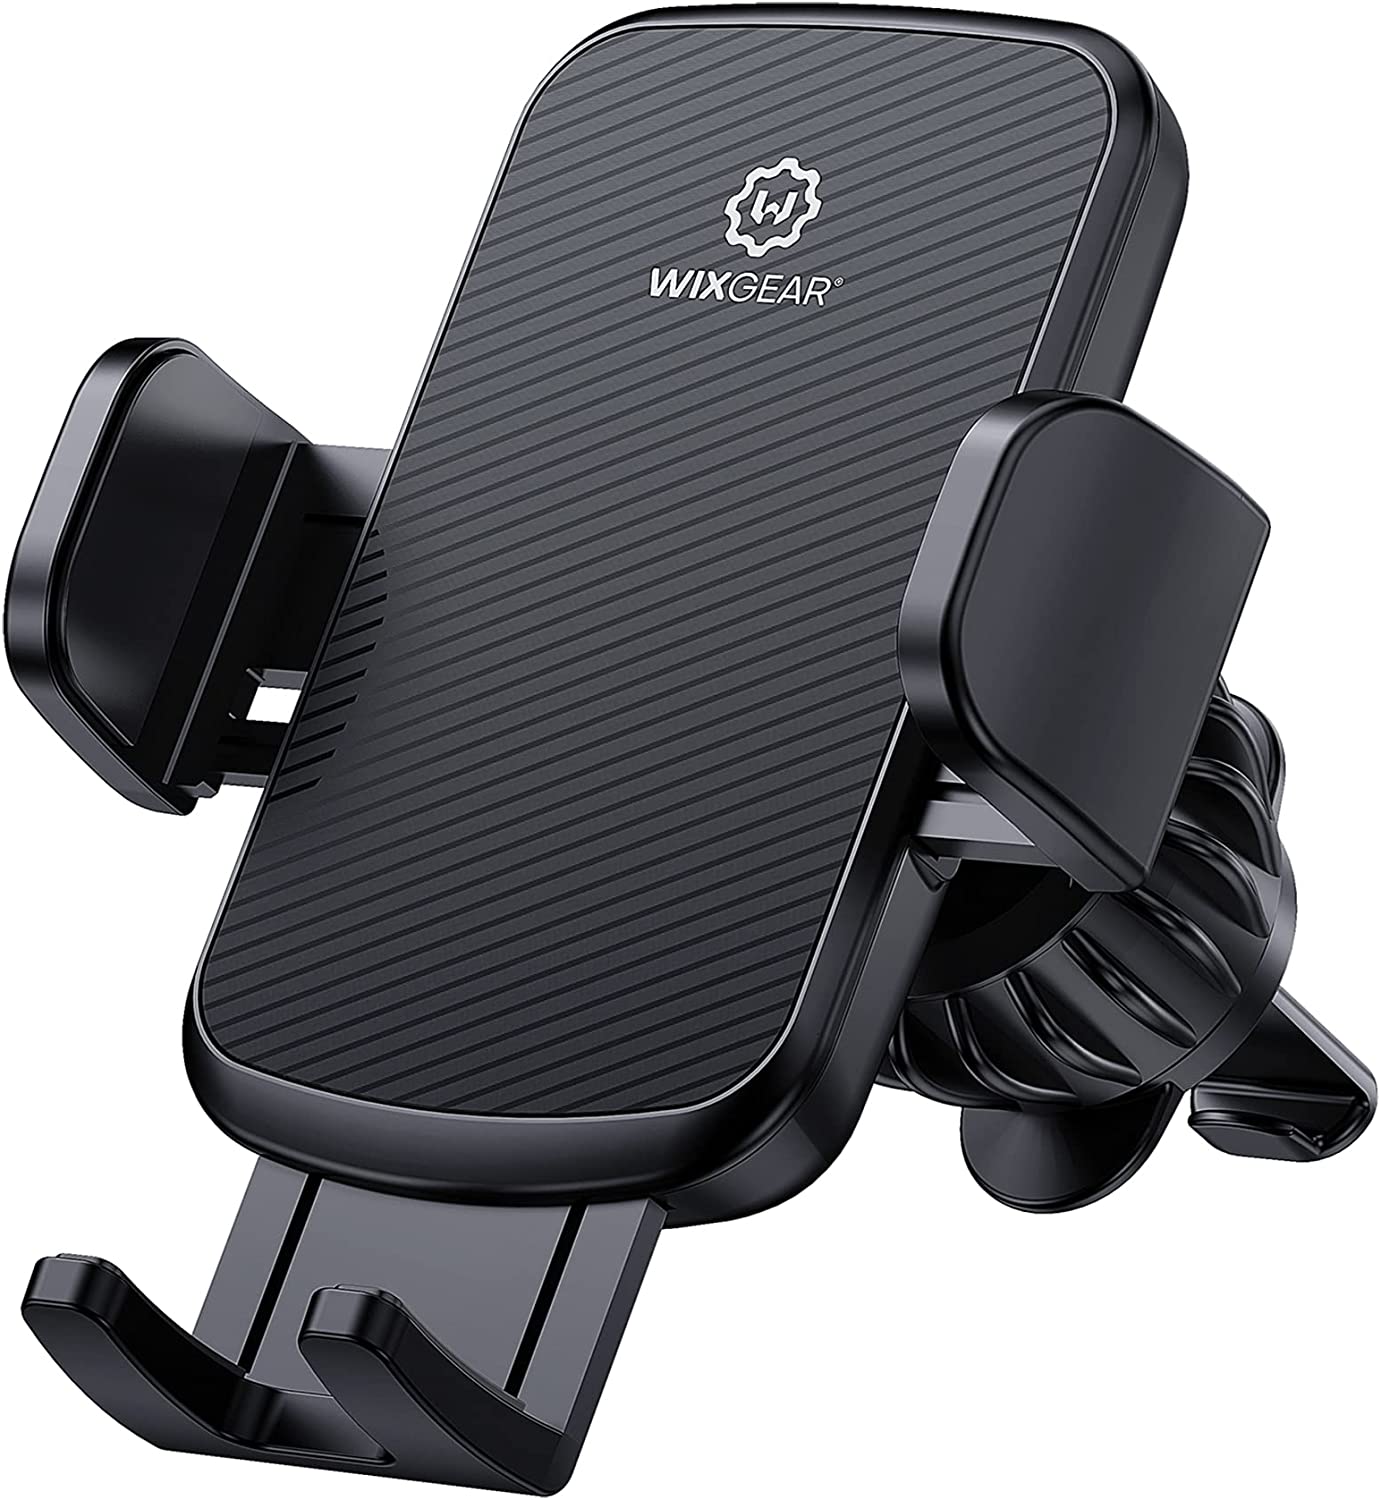 WixGear Universal Air Vent Phone Holder for Car, Phone Mount for Car for Cell Phones (New Upgraded Vent Locks)